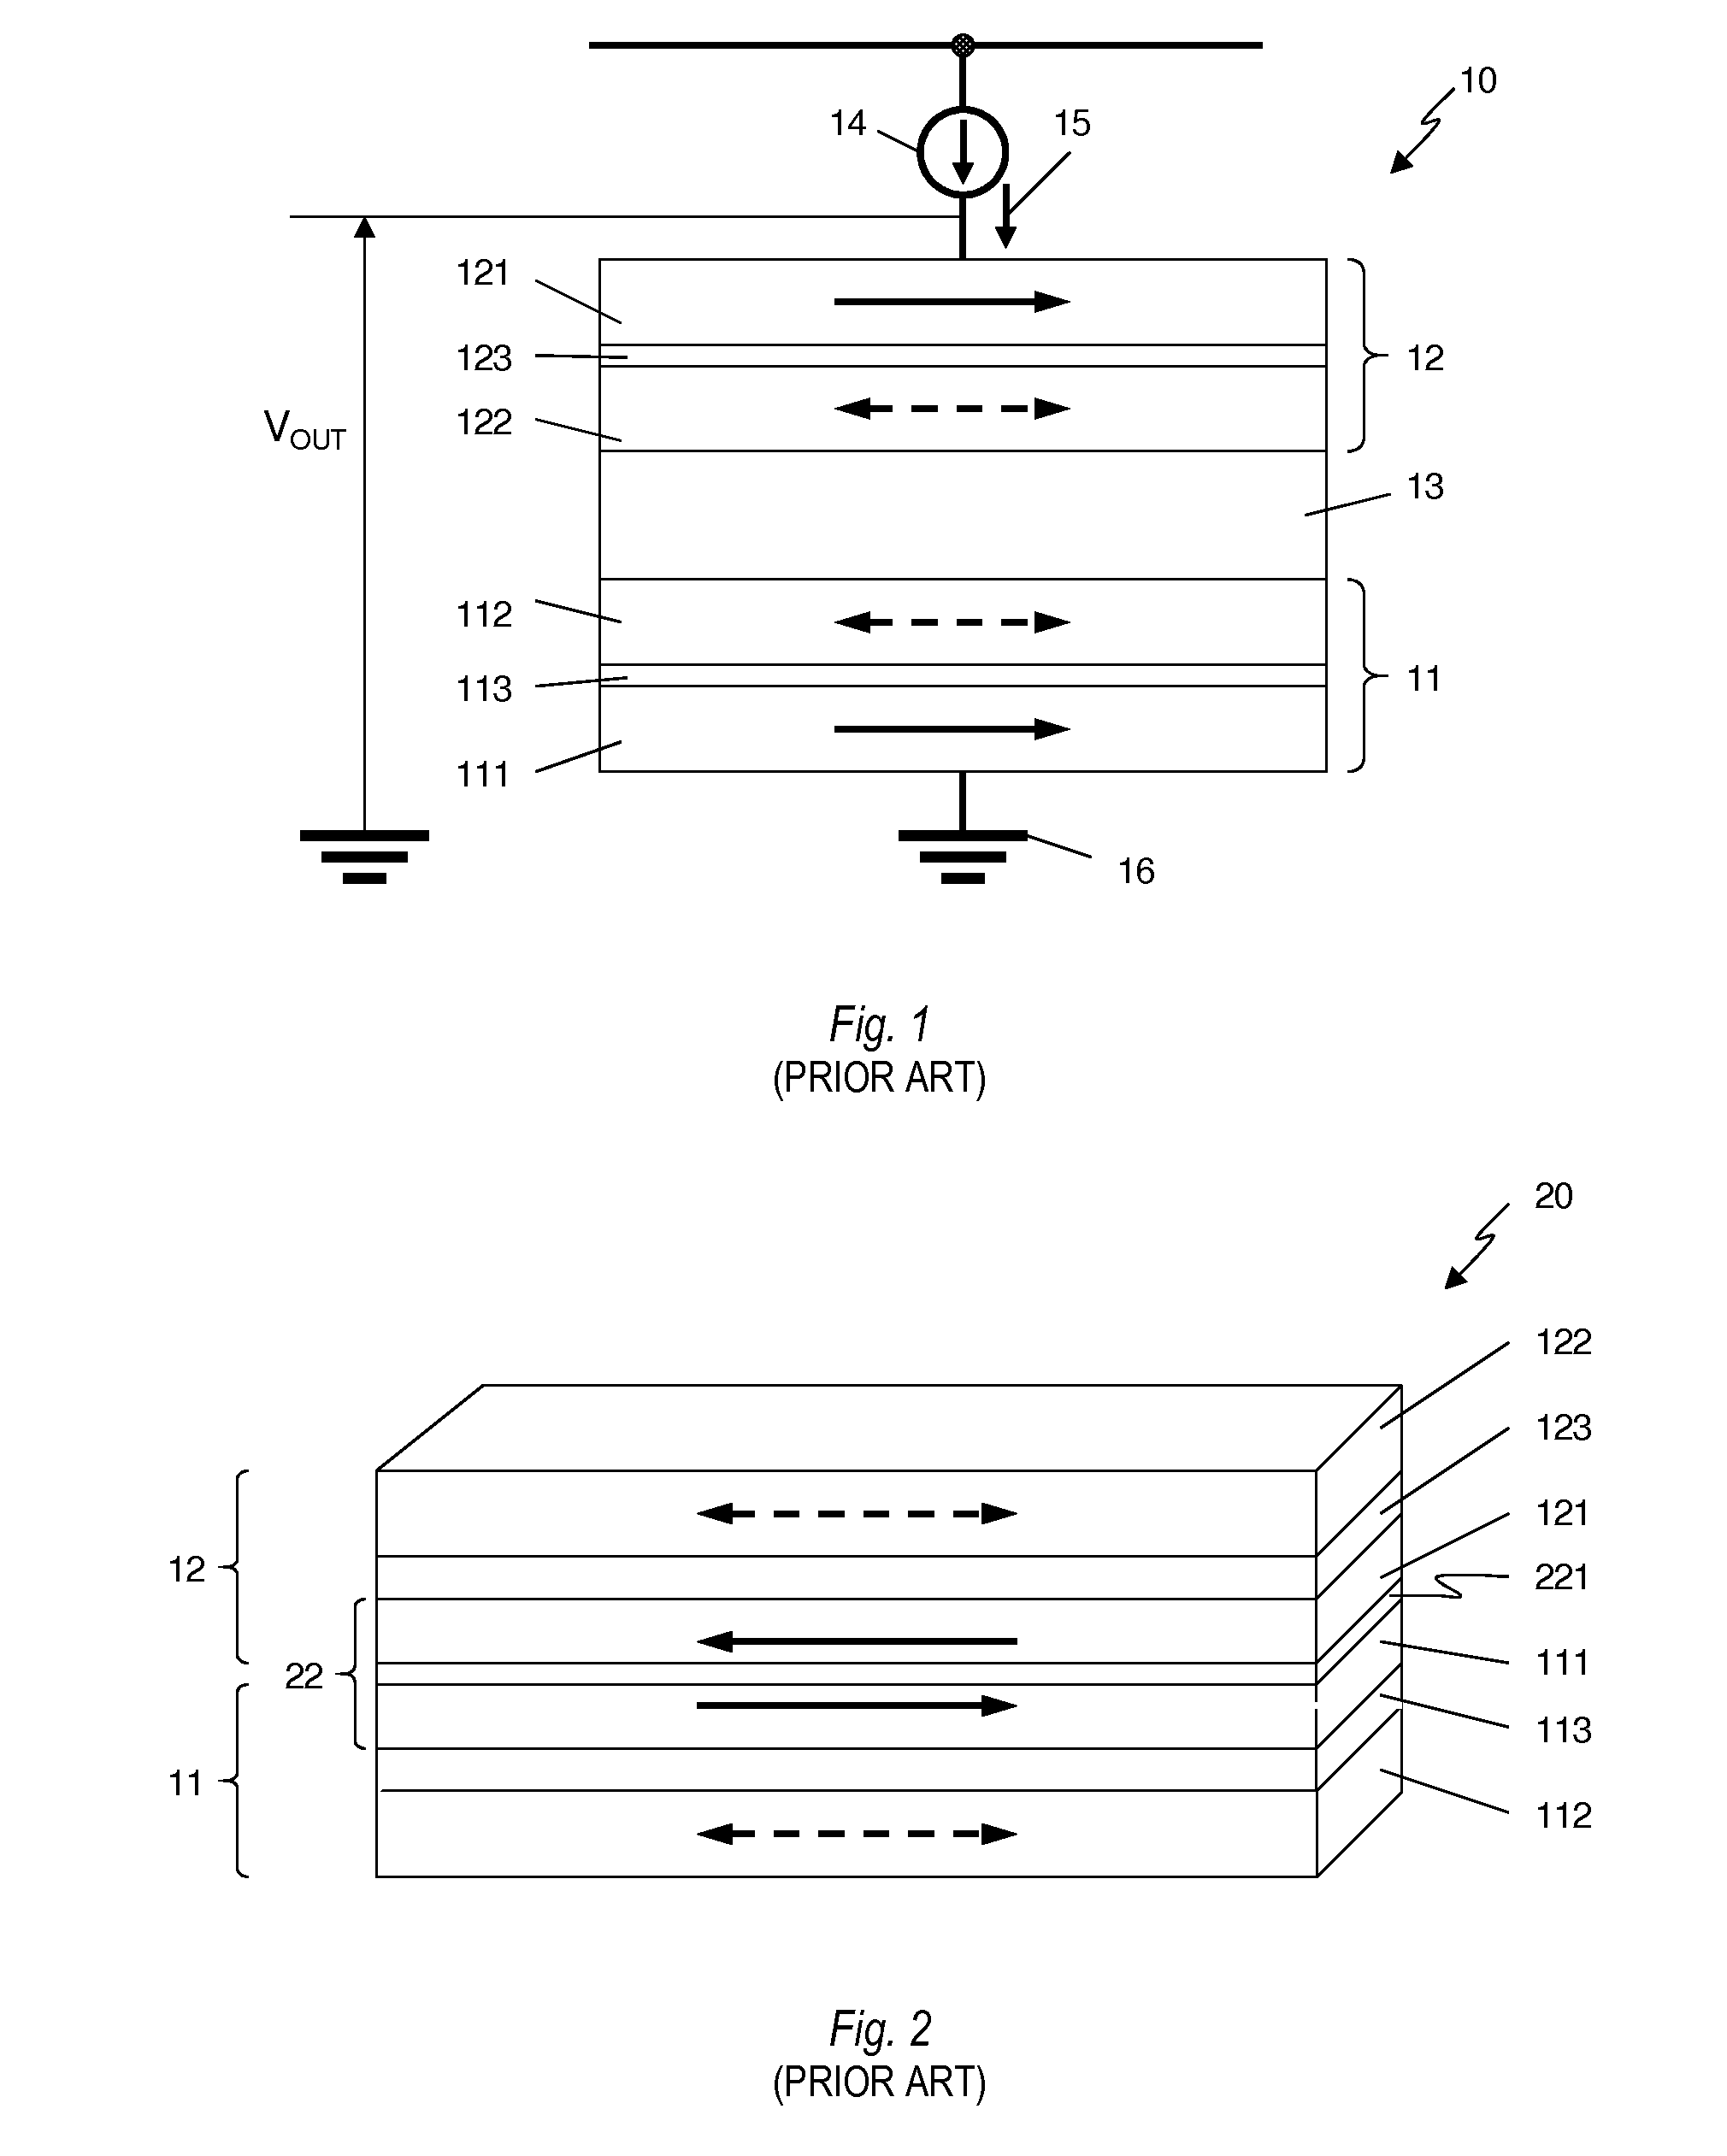 Multibit Cell of Magnetic Random Access Memory with Perpendicular Magnetization